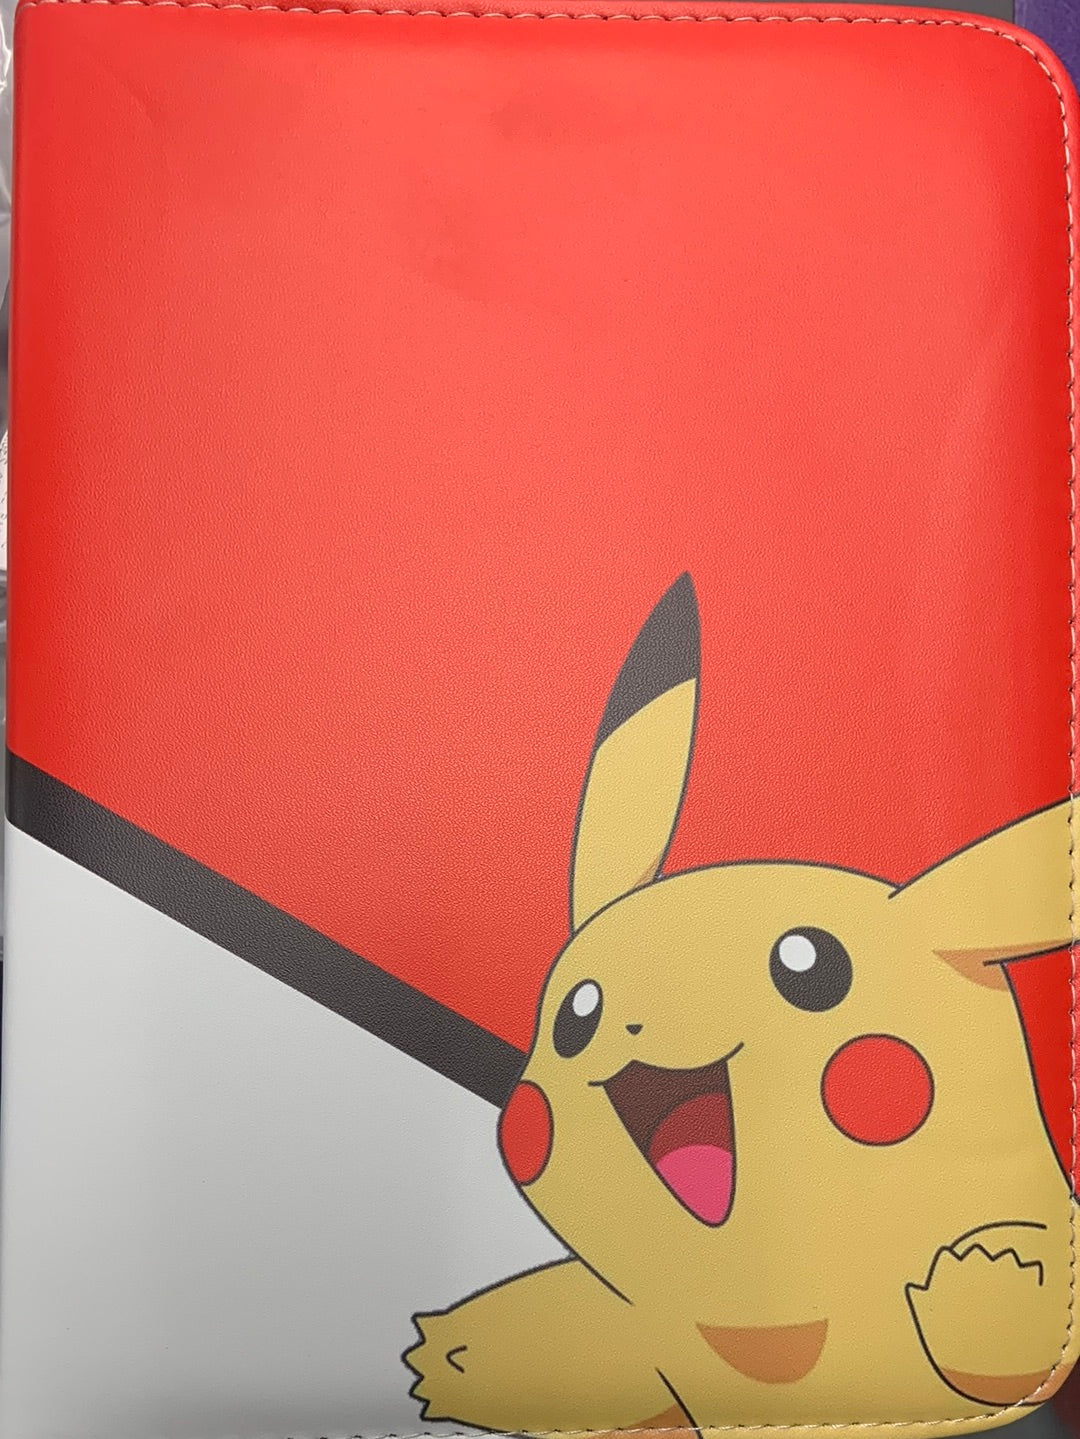 Card Binder for Trading Card Collection